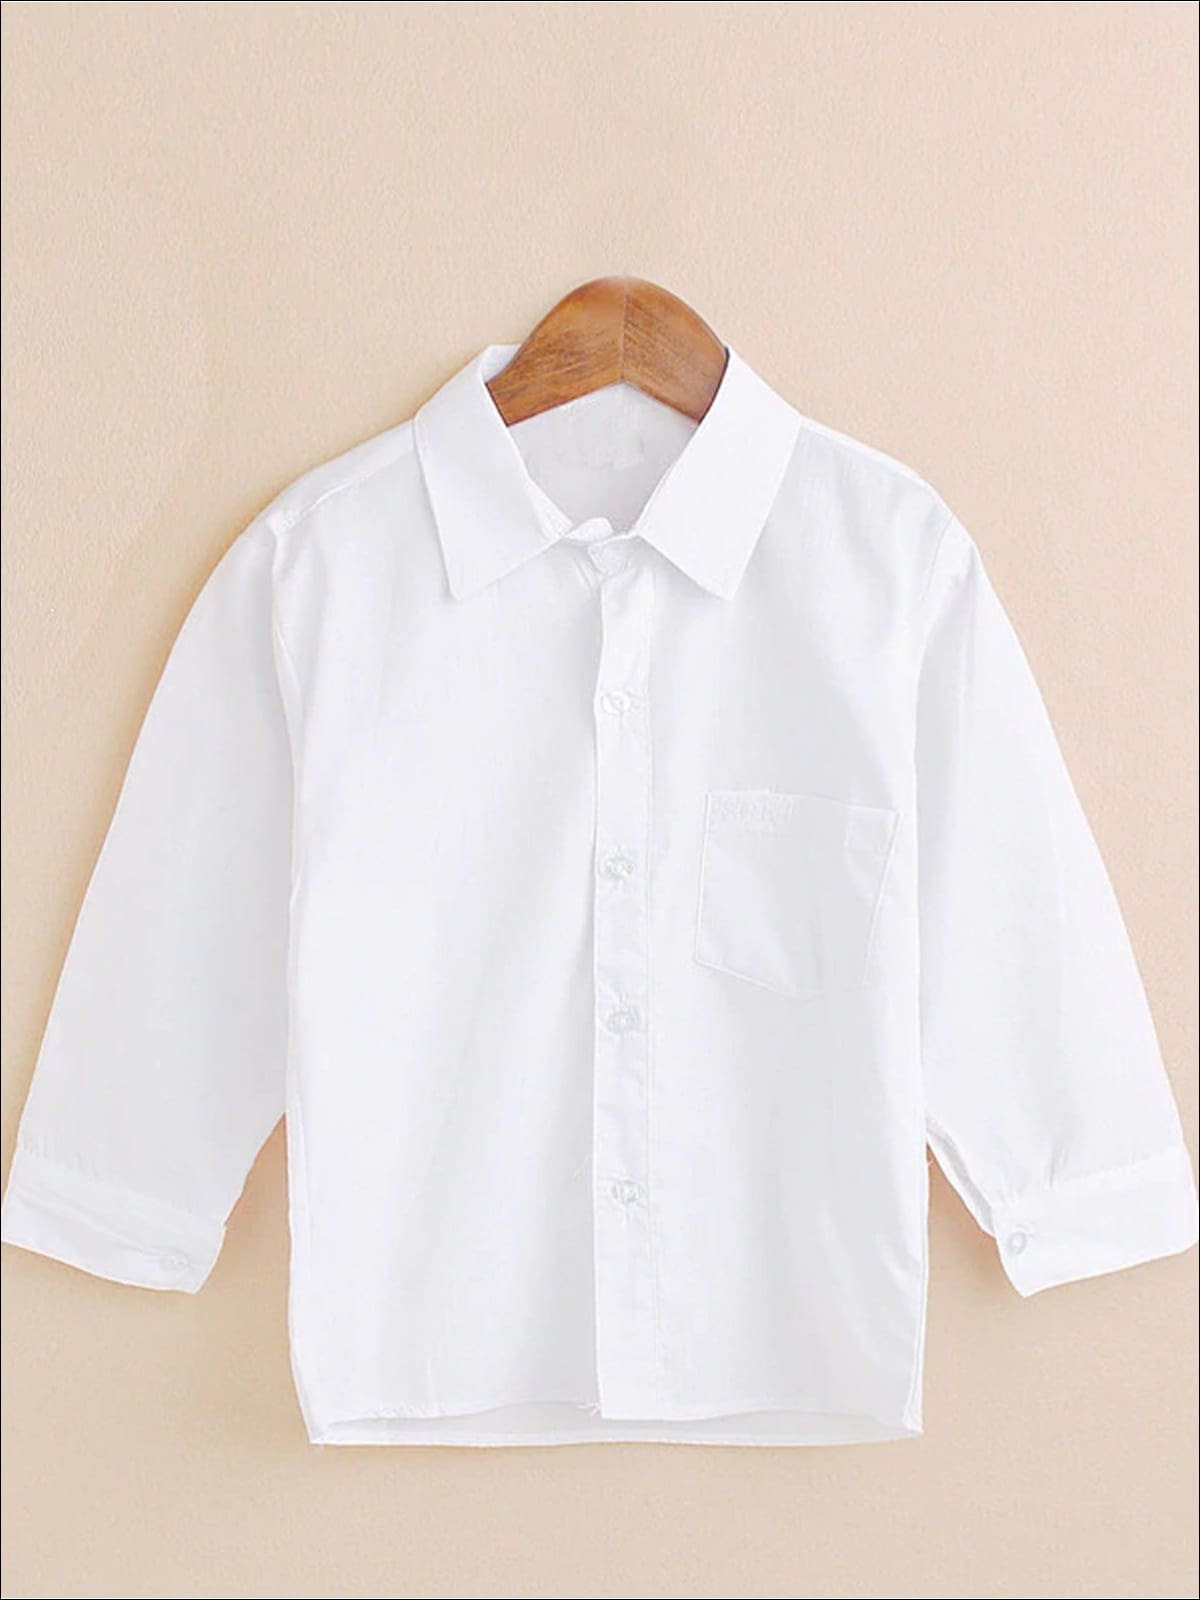 Girls Preppy White Button Up Long Sleeve Top - White / 18M - Girls Fall Top